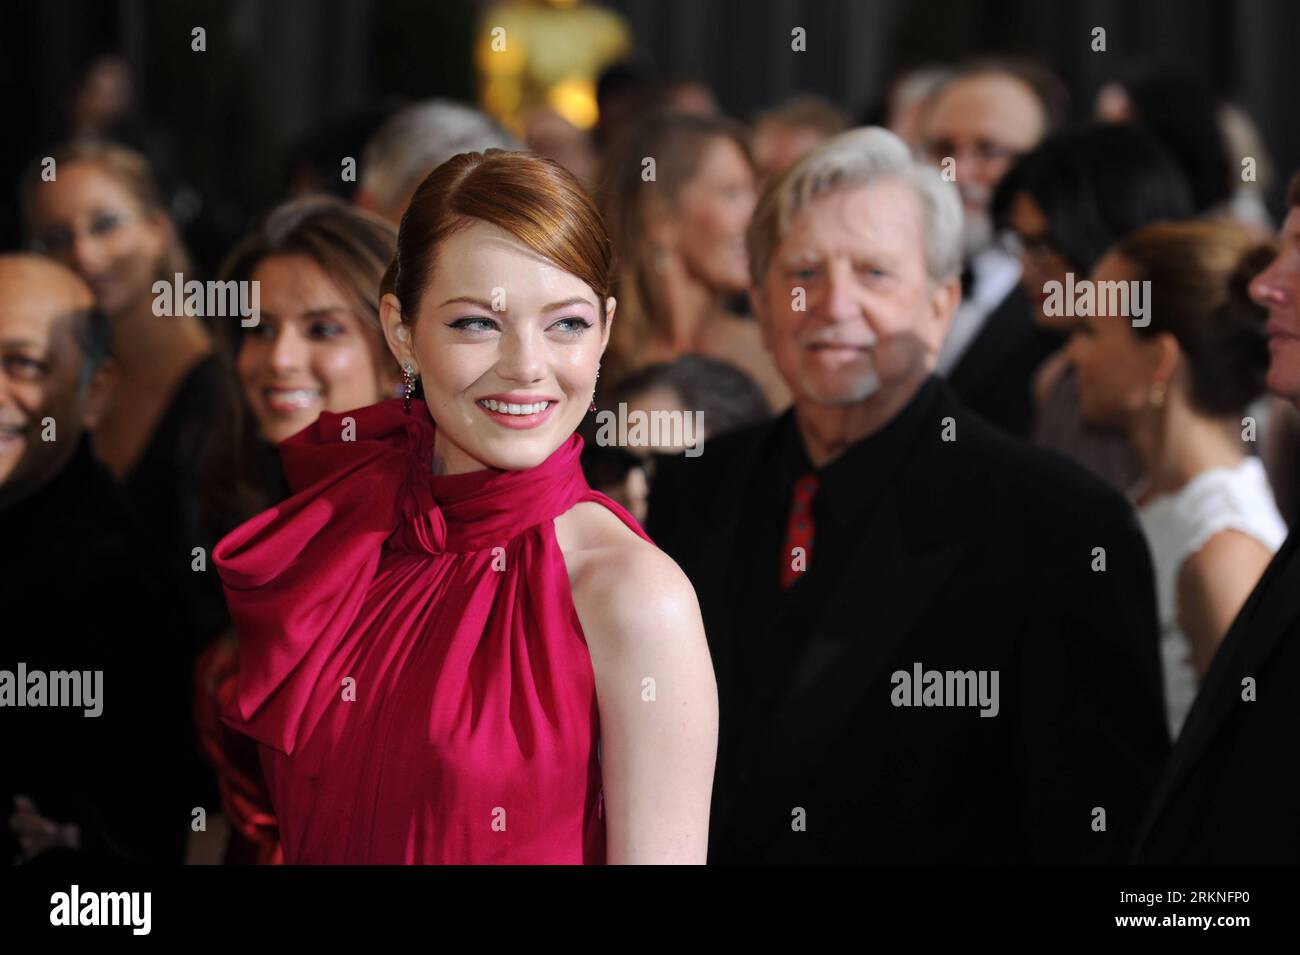 Feb. 26, 2012 - Hollywood, California, U.S. - EMMA STONE wears a red  Giambattista Valli gown and Louis Vuitton jewels as she arrives on the  Oscar red carpet at the 84th Academy